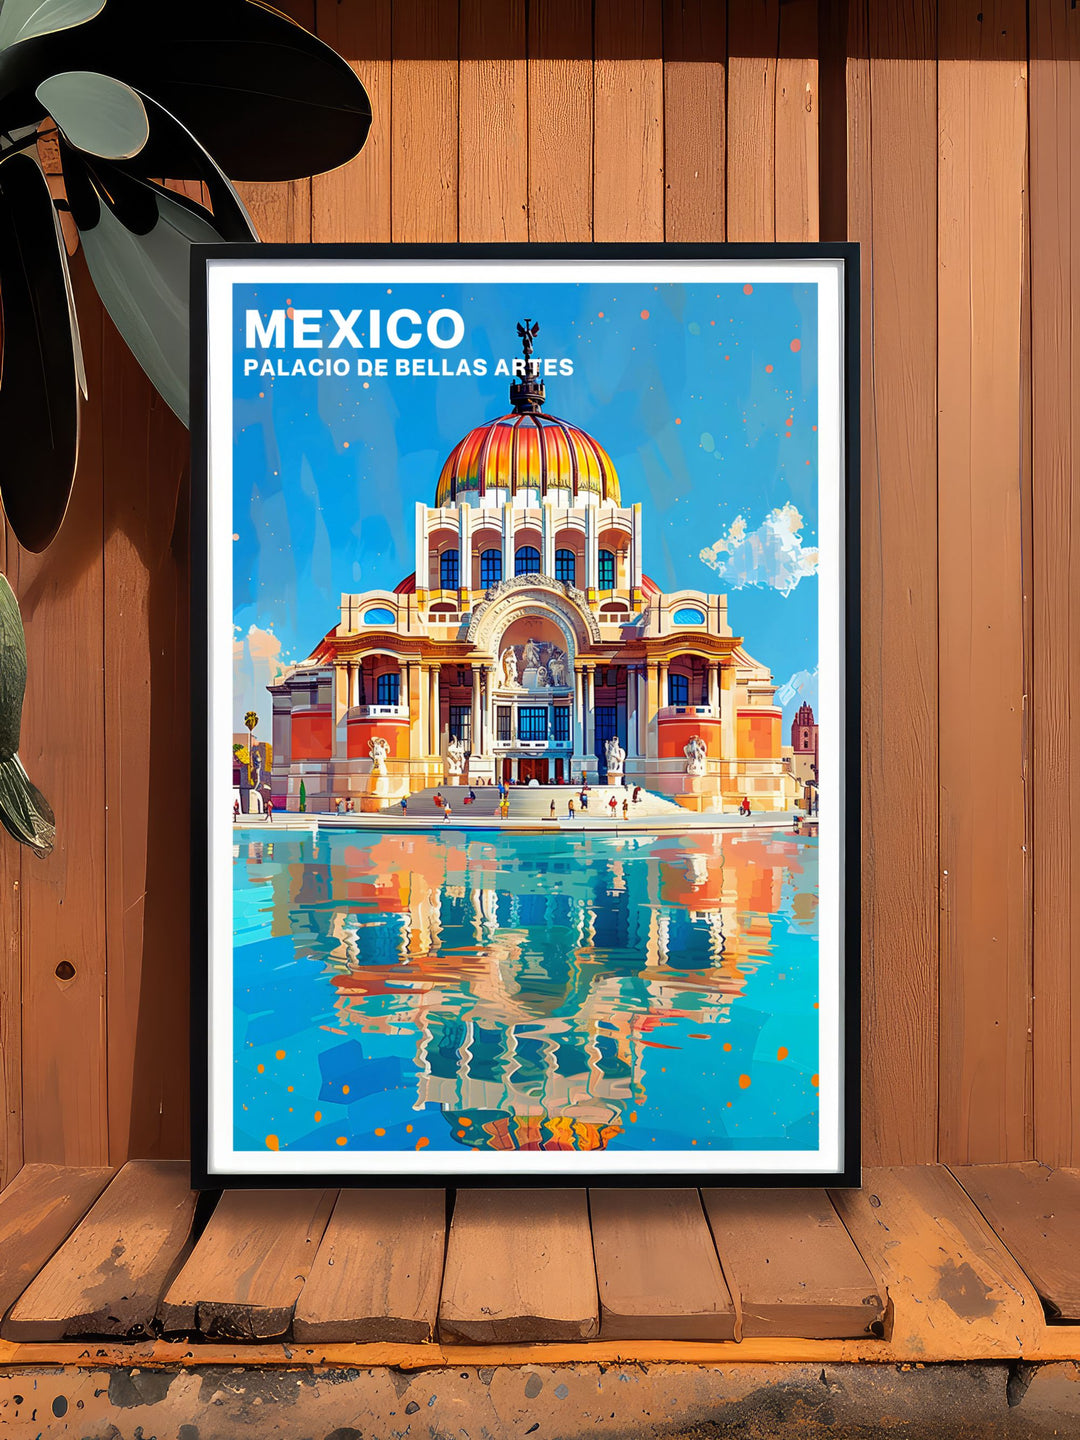 Enhance your living space with this Palacio de Bellas Artes artwork. This print showcases the architectural beauty of Palacio de Bellas Artes and is an excellent piece of Mexico wall art. Perfect for anyone who appreciates Mexico travel prints and Mexican cultural landmarks.